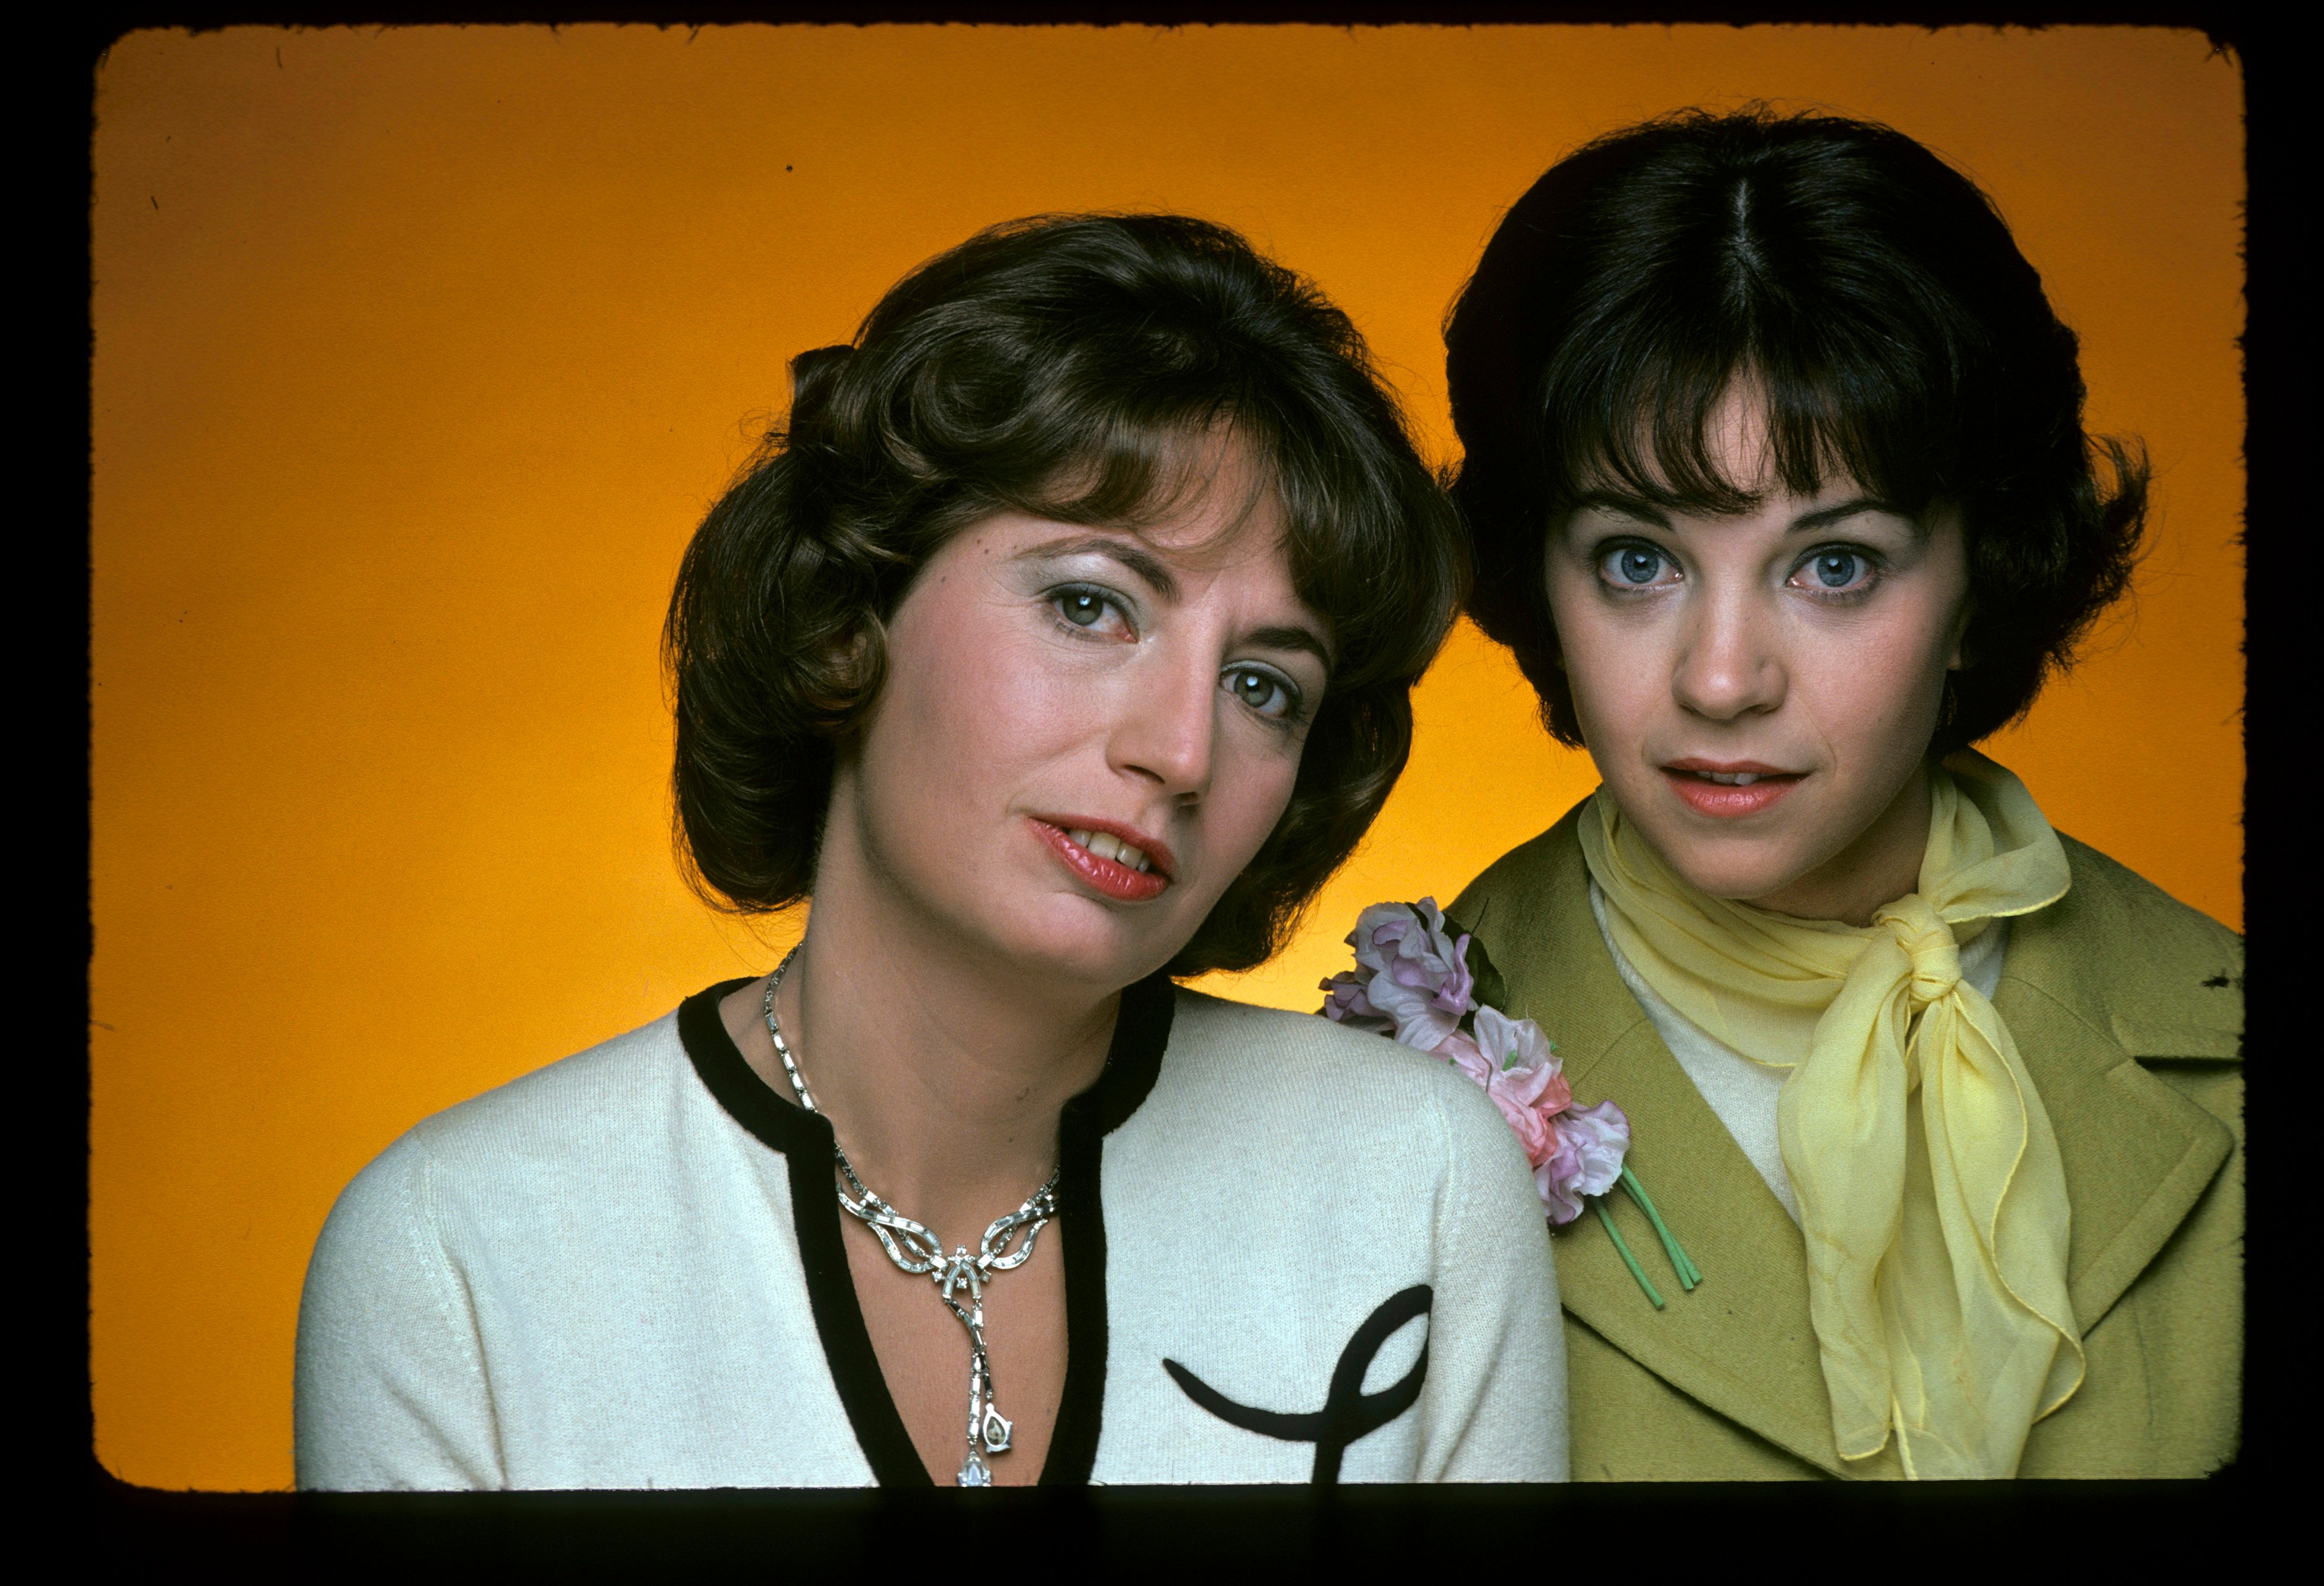 'Laverne & Shirley' stars Penny Marshall as Laverne and Cindy Williams as Shirley